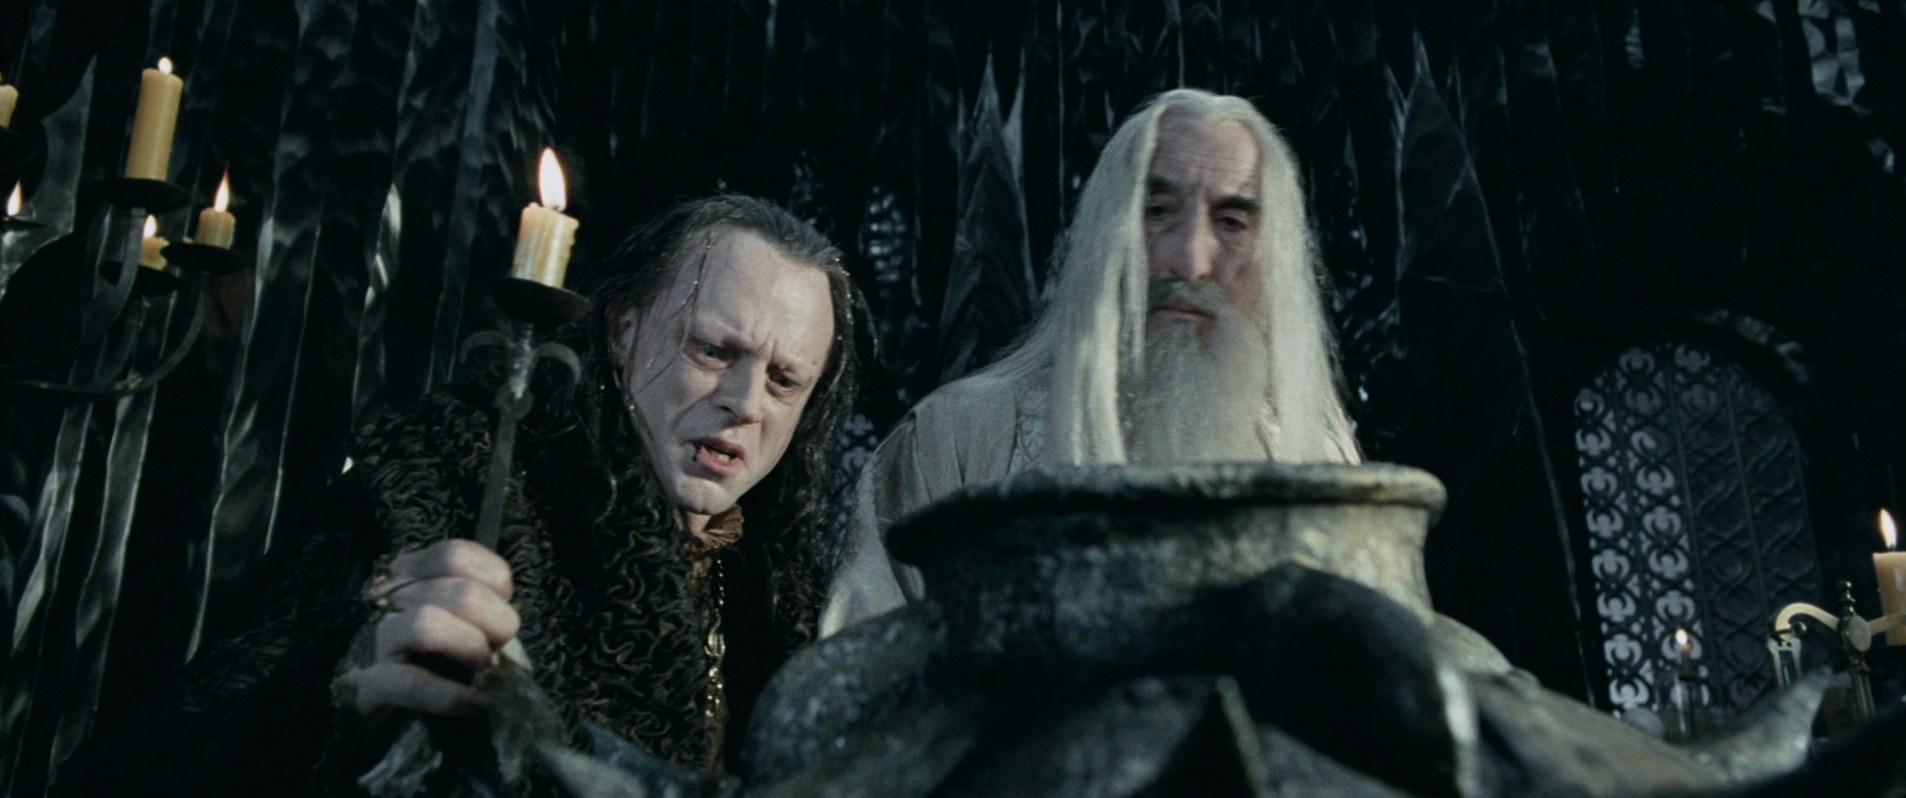 Brad Dourif and Christopher Lee in The Lord of the Rings: The Two Towers (2002)